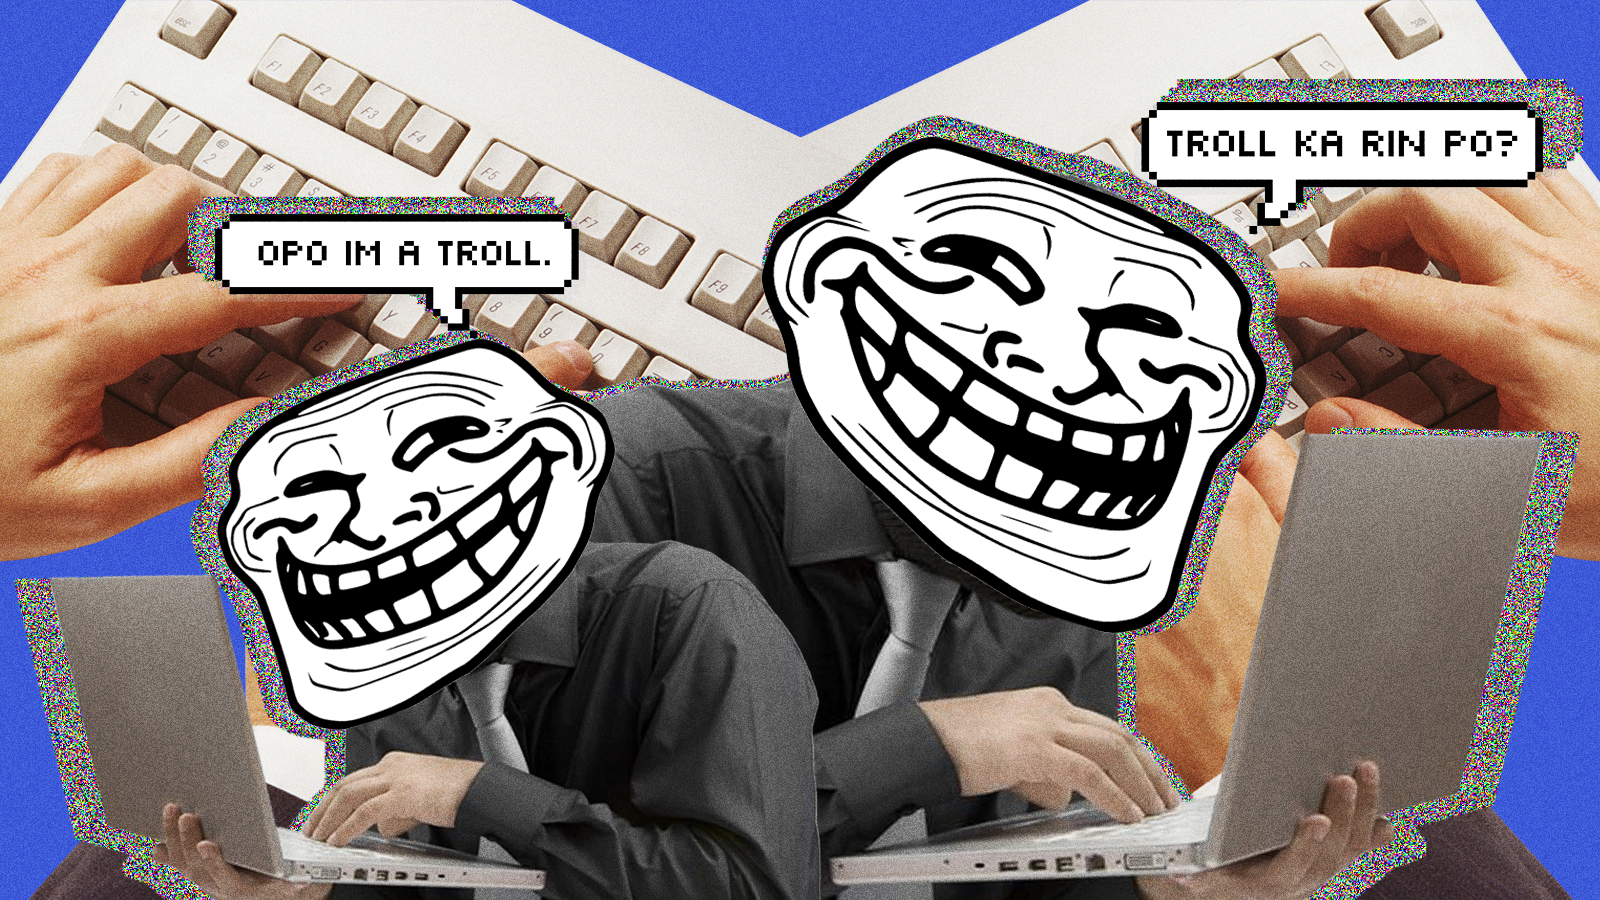 Why Do People Troll Online?